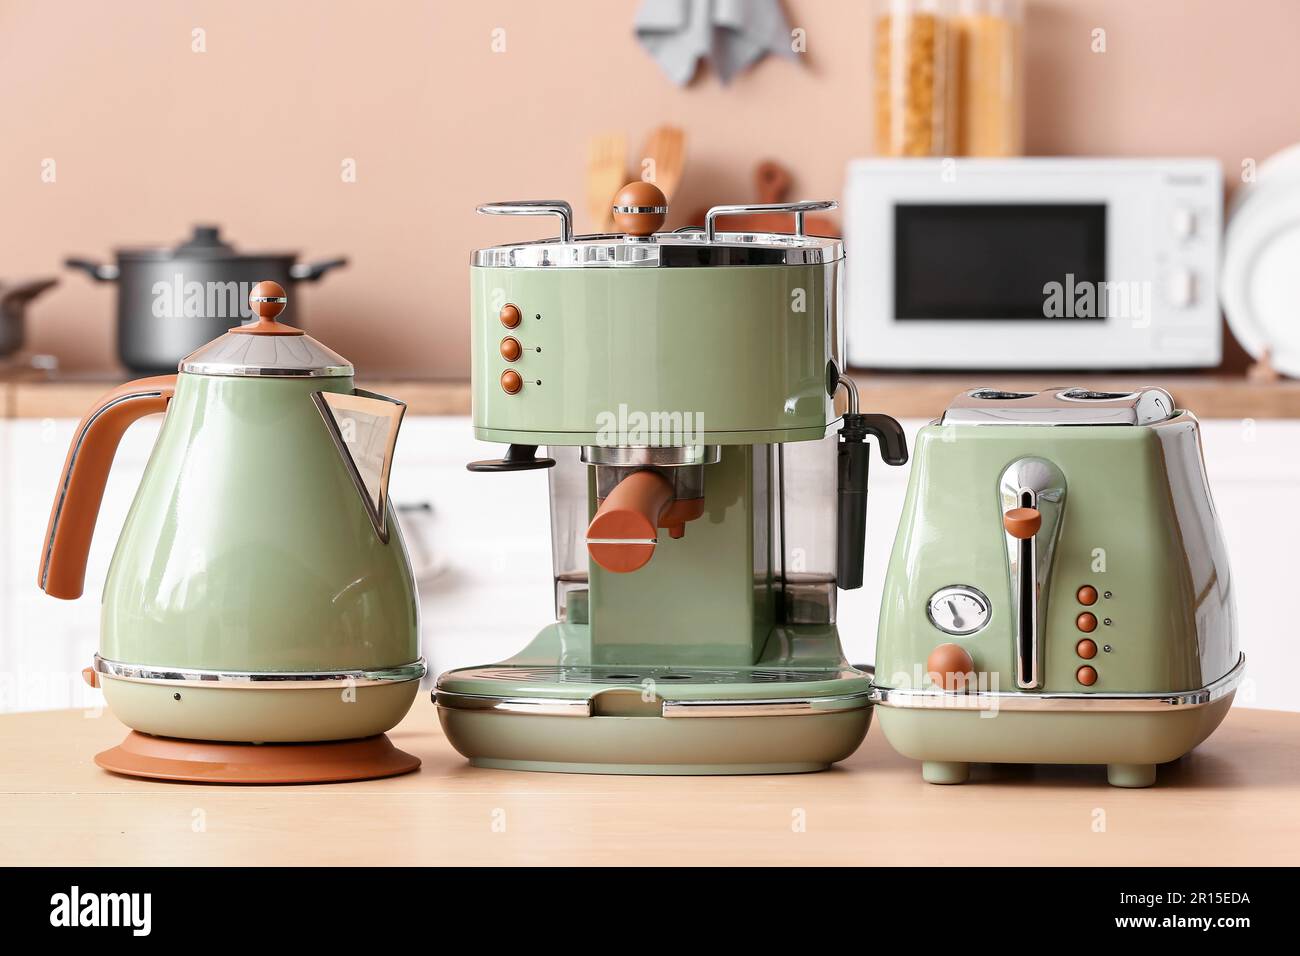 https://c8.alamy.com/comp/2R15EDA/electric-kettle-modern-coffee-machine-and-toaster-on-wooden-table-in-kitchen-2R15EDA.jpg